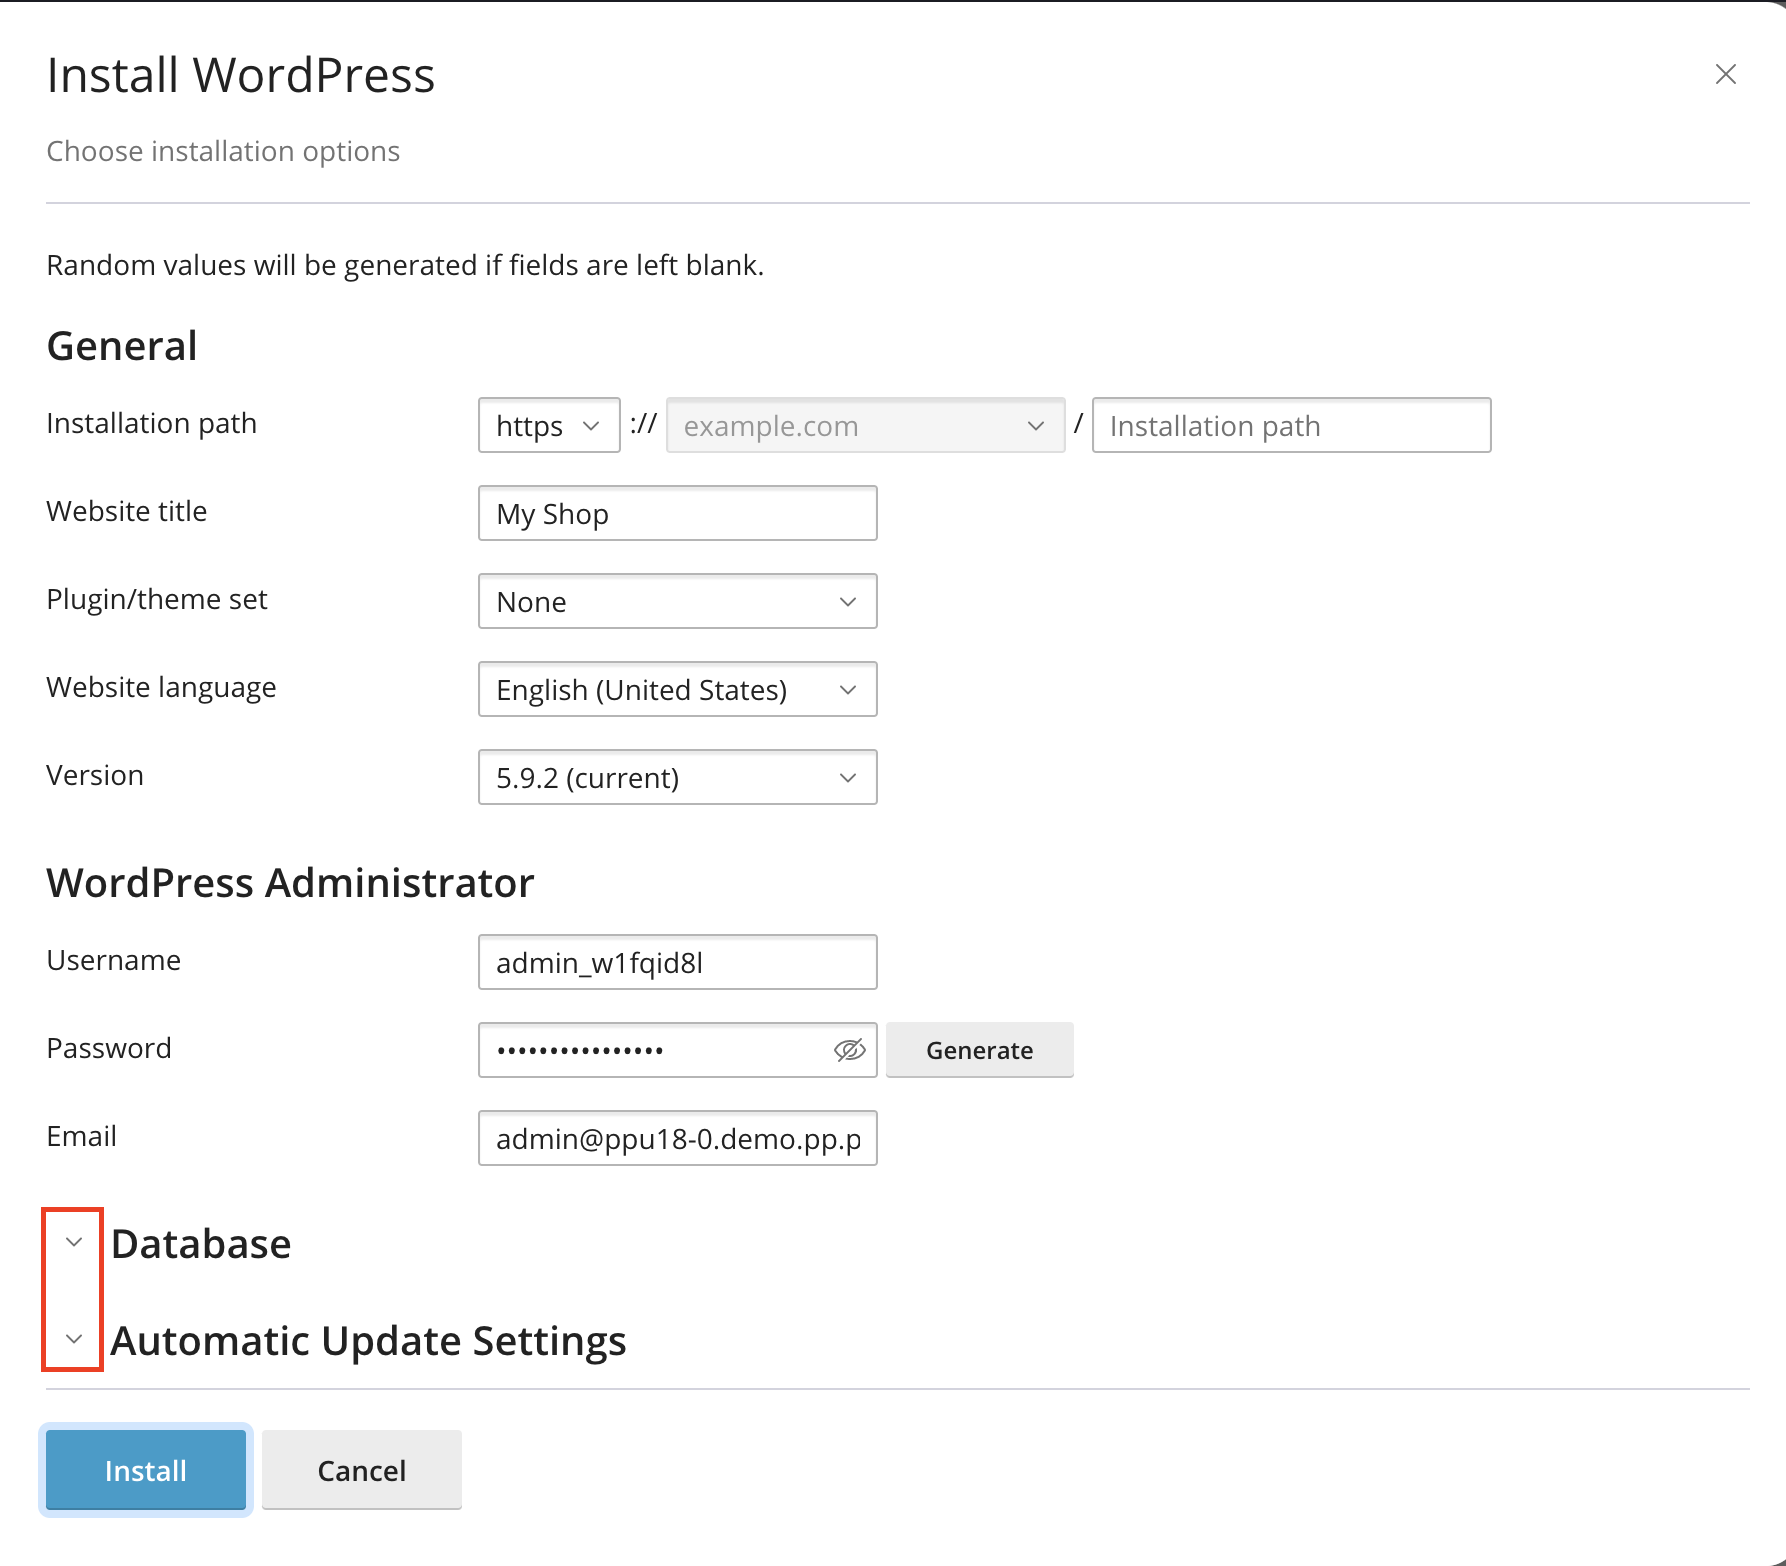 'Install WordPress' screen where custom settings are available as well